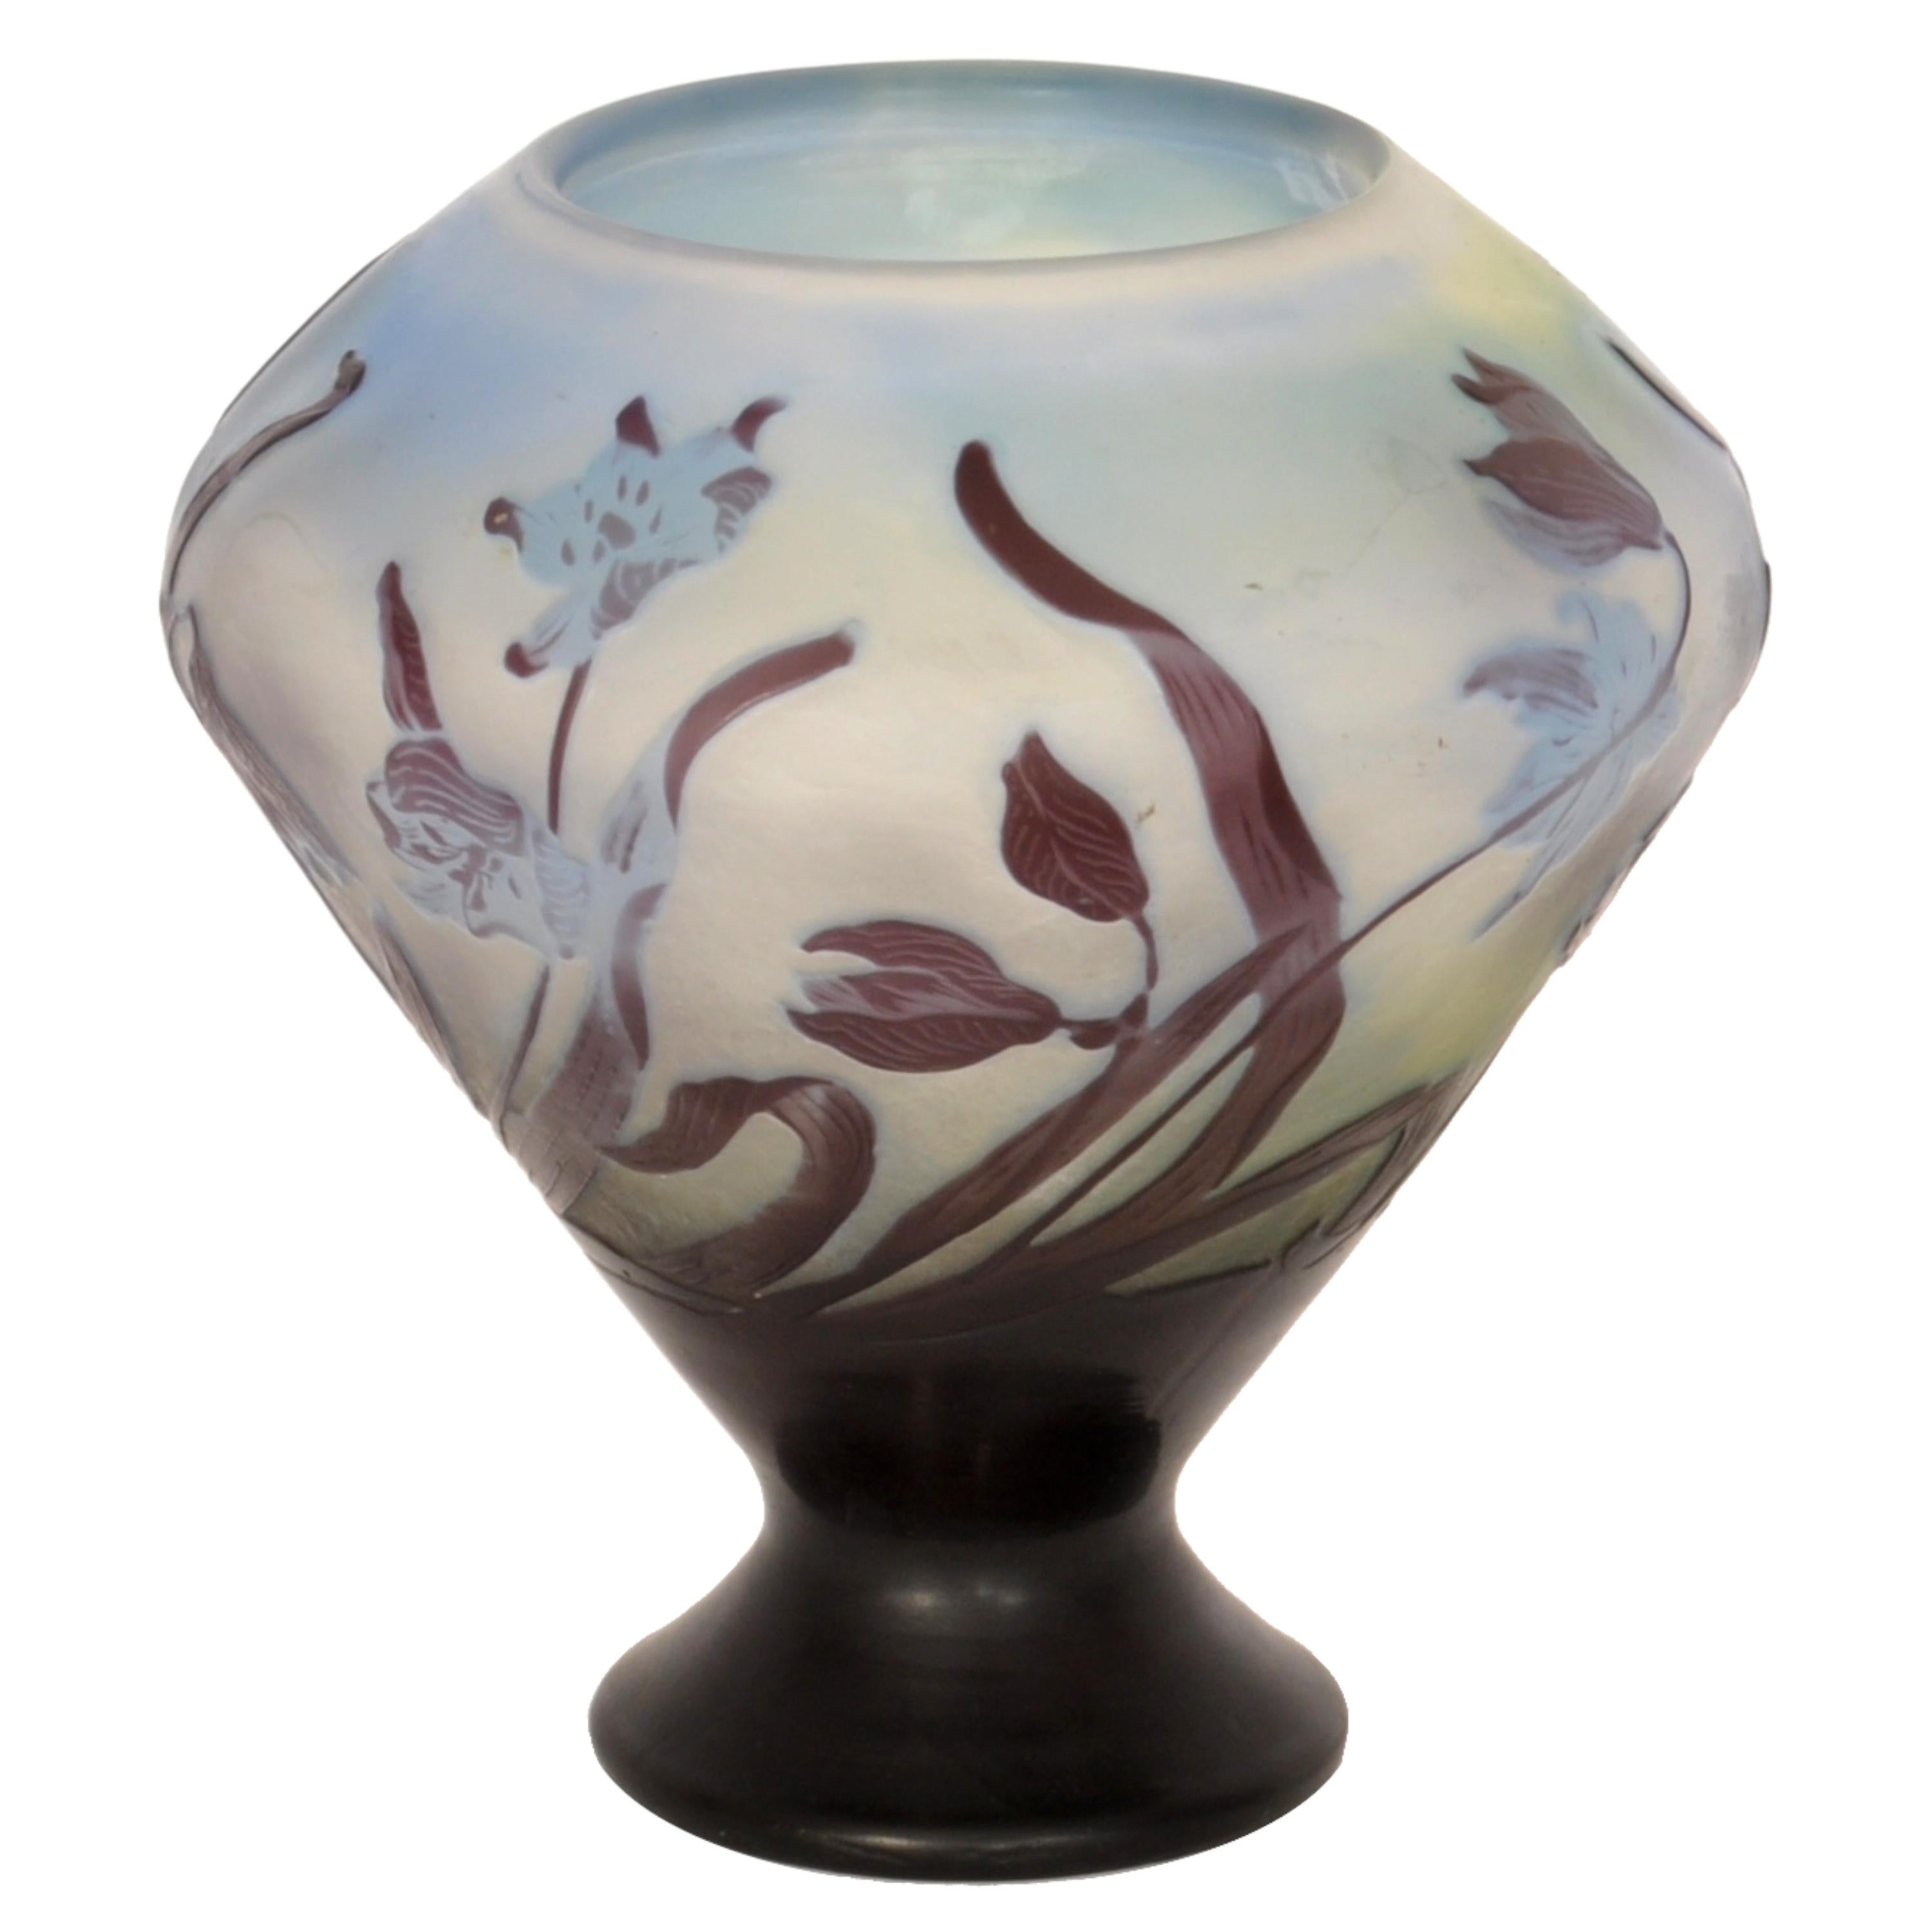 A fine antique French Art Nouveau Emille Galle cameo glass coupe vase, circa 1900.
The beautiful coupe shaped is finely wheel carved and acid etched & fire polished, the cameo decoration of purple and light blue colored orchids with trailing